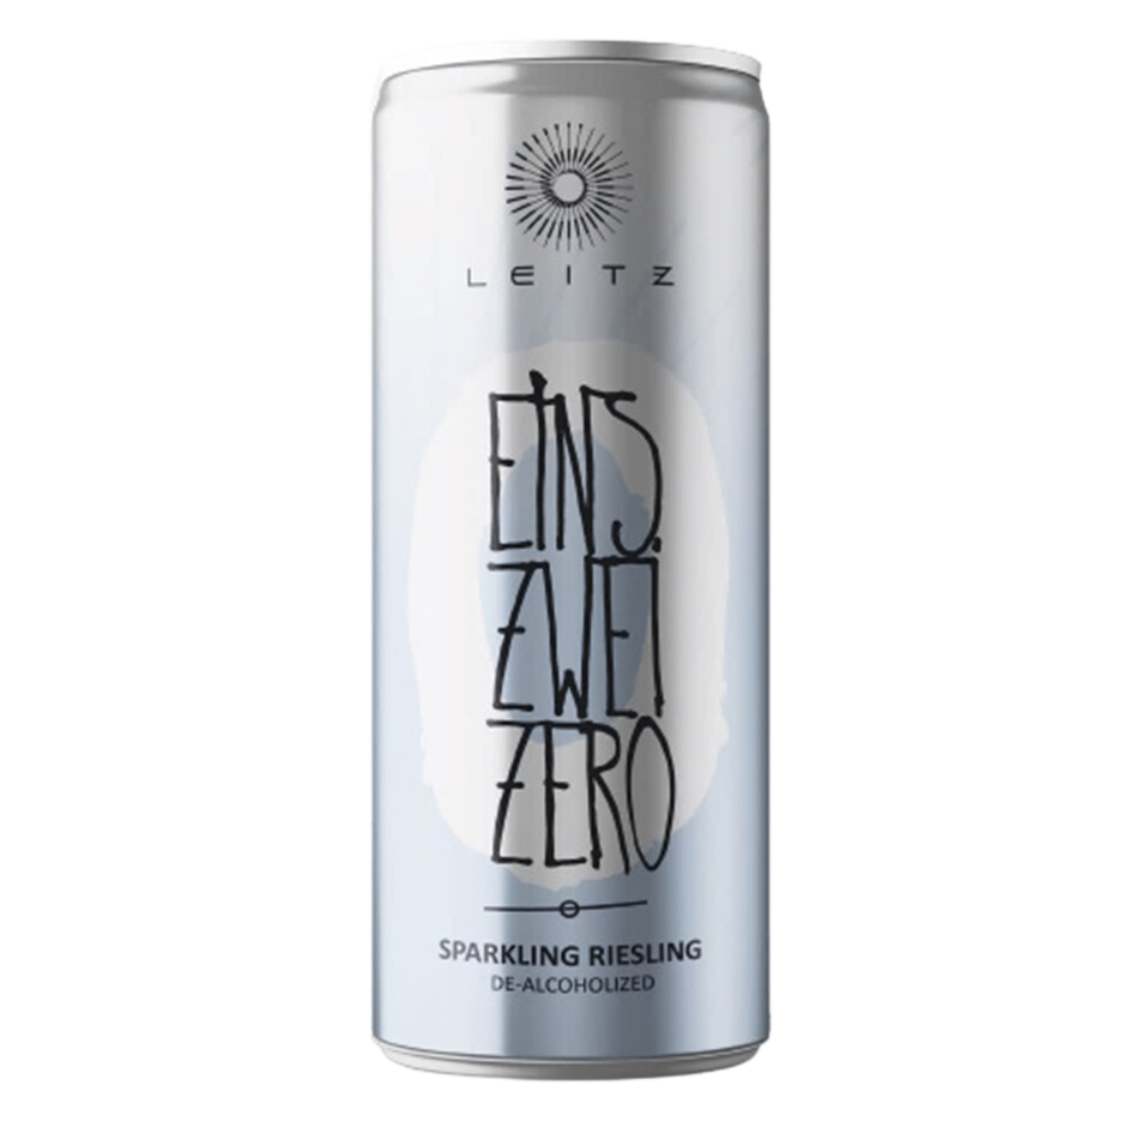 Leitz Eins Zwei Zero Alcohol-free Sparkling Riesling | 4-pack Cans